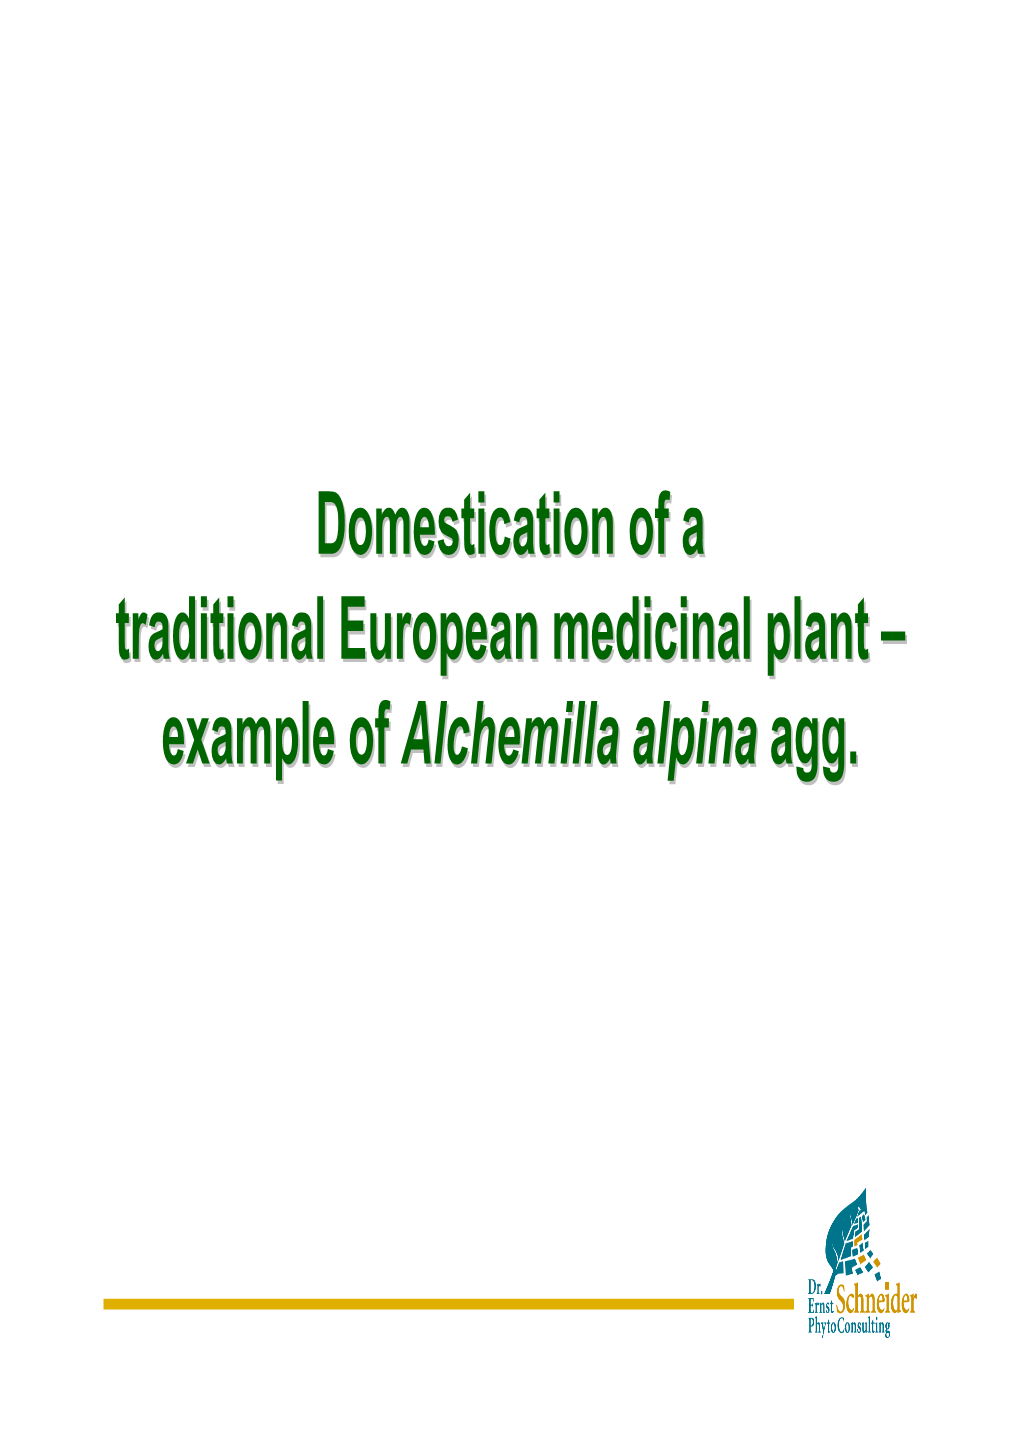 Domestication of a Traditional European Medicinal Plant